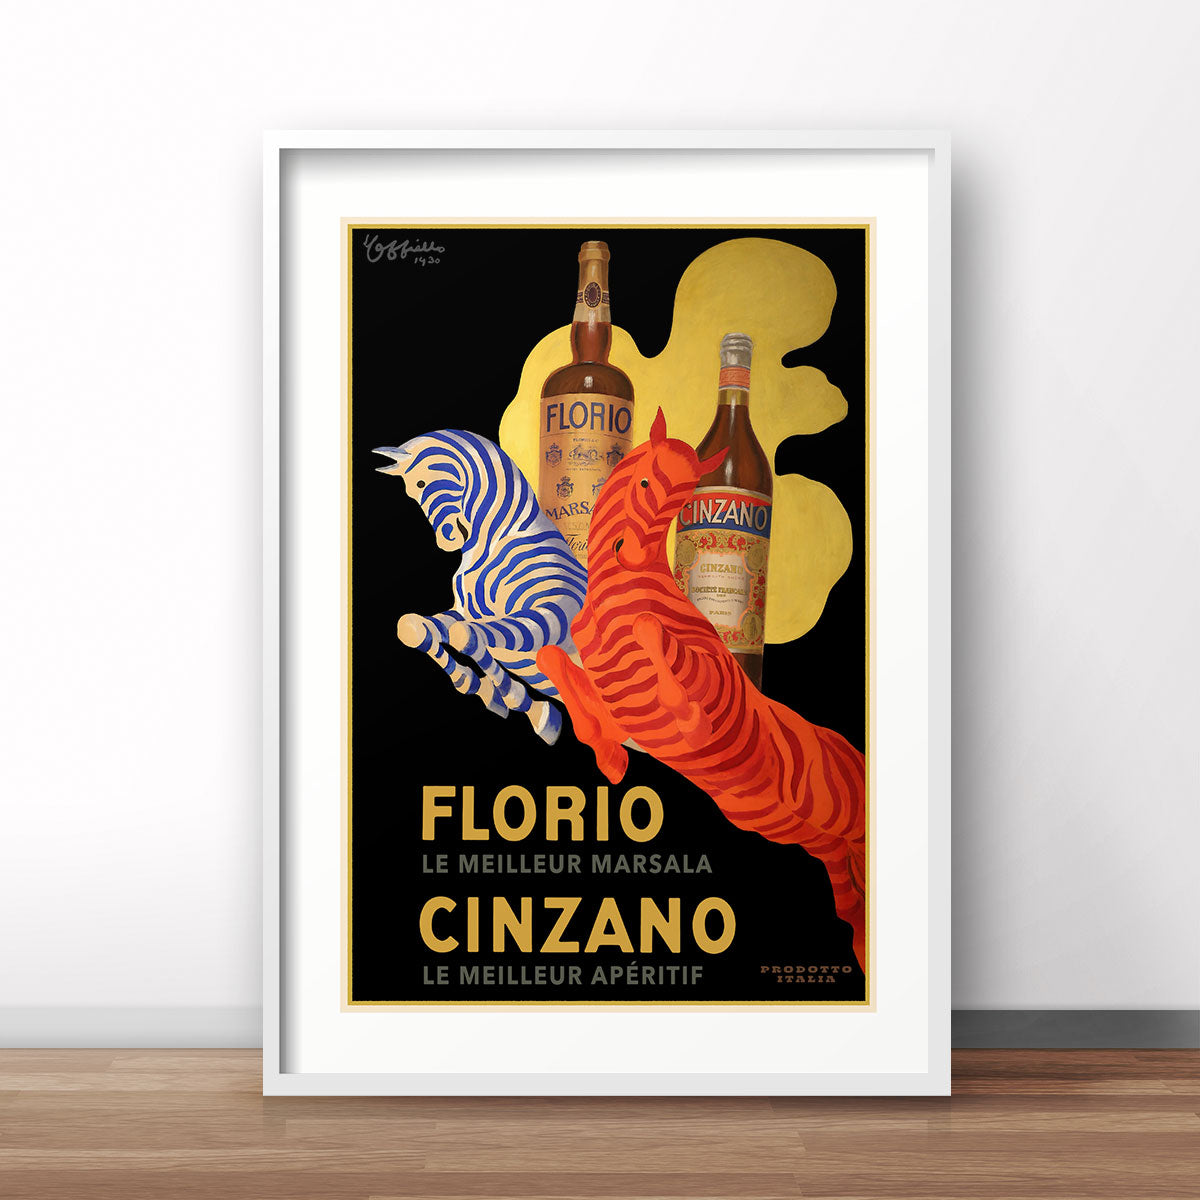 Florio Cinzano Italy retro vintage advertising poster print from Places We Luv